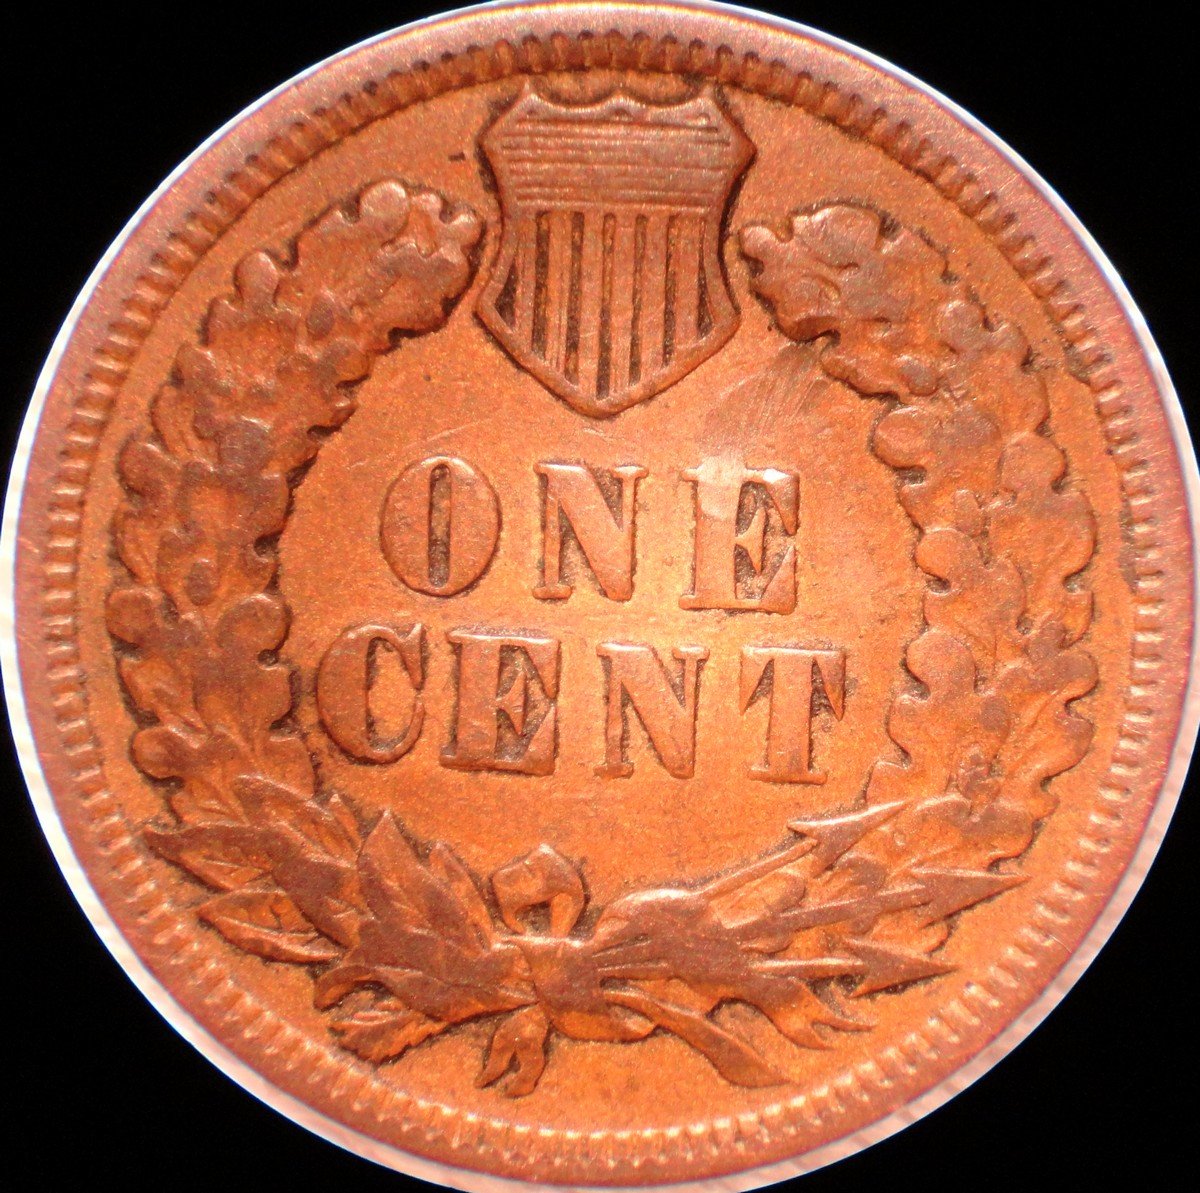 1890 Reverse of MPD-005 Indian Head Penny